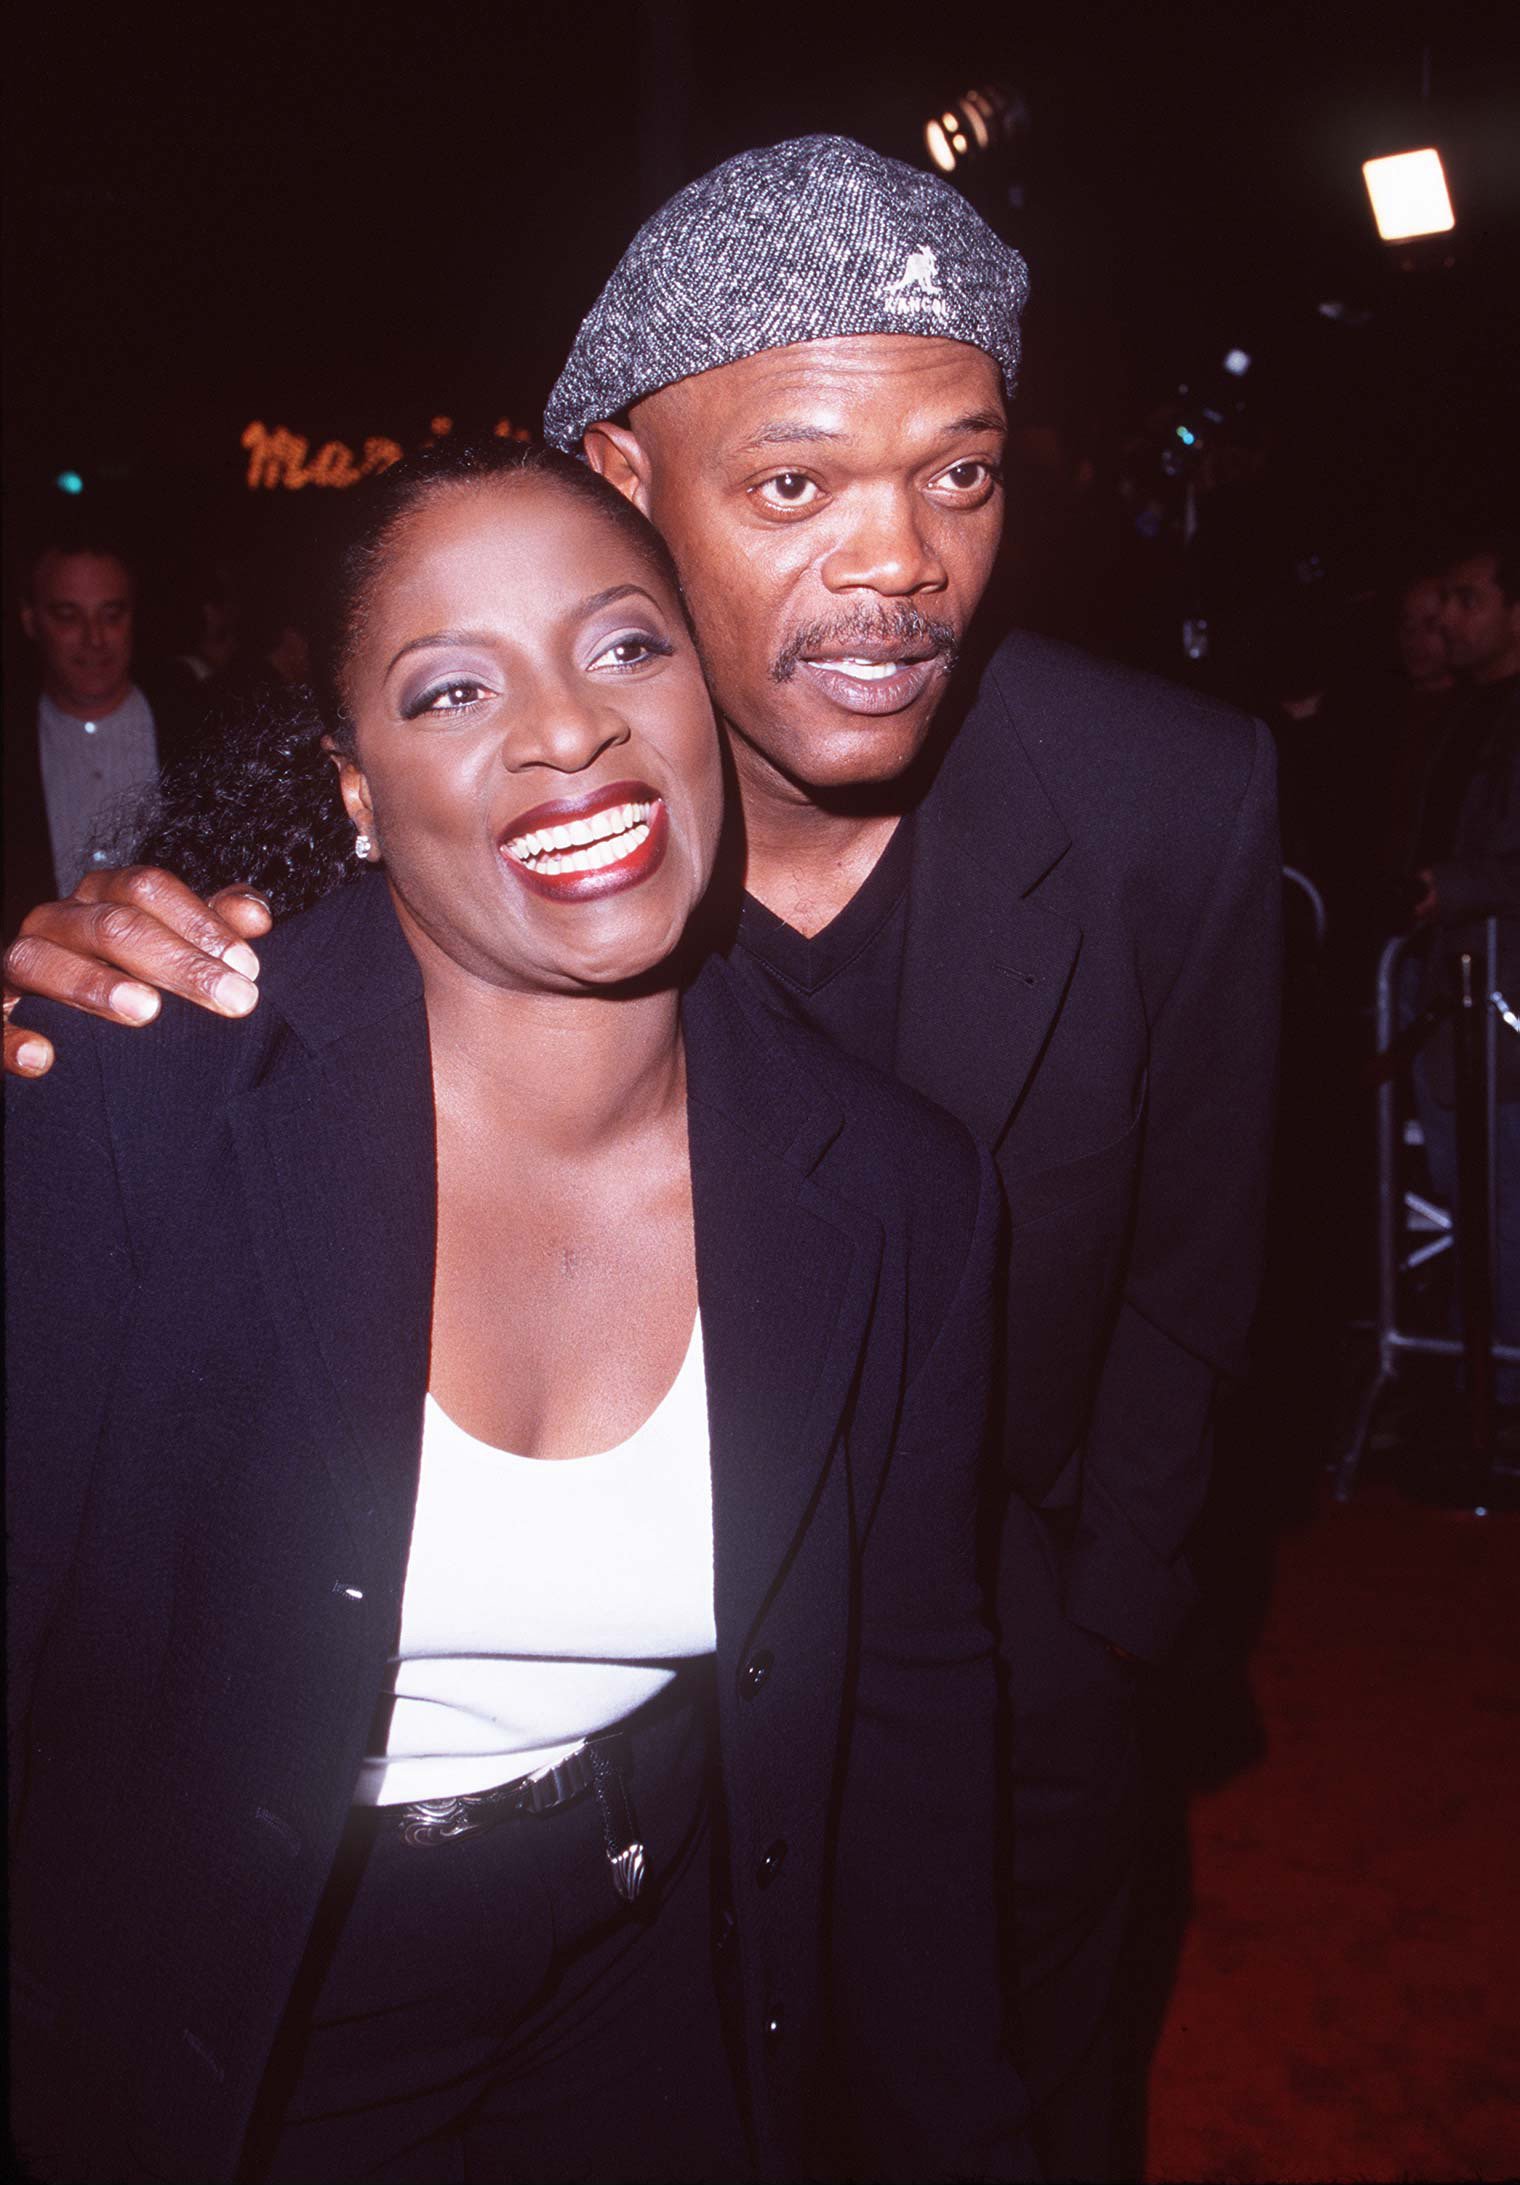 LaTanya Richardson and Samuel L. Jackson during "U.S. Marshals" Los Angeles premiere in Westwood, California | Source: Getty Images